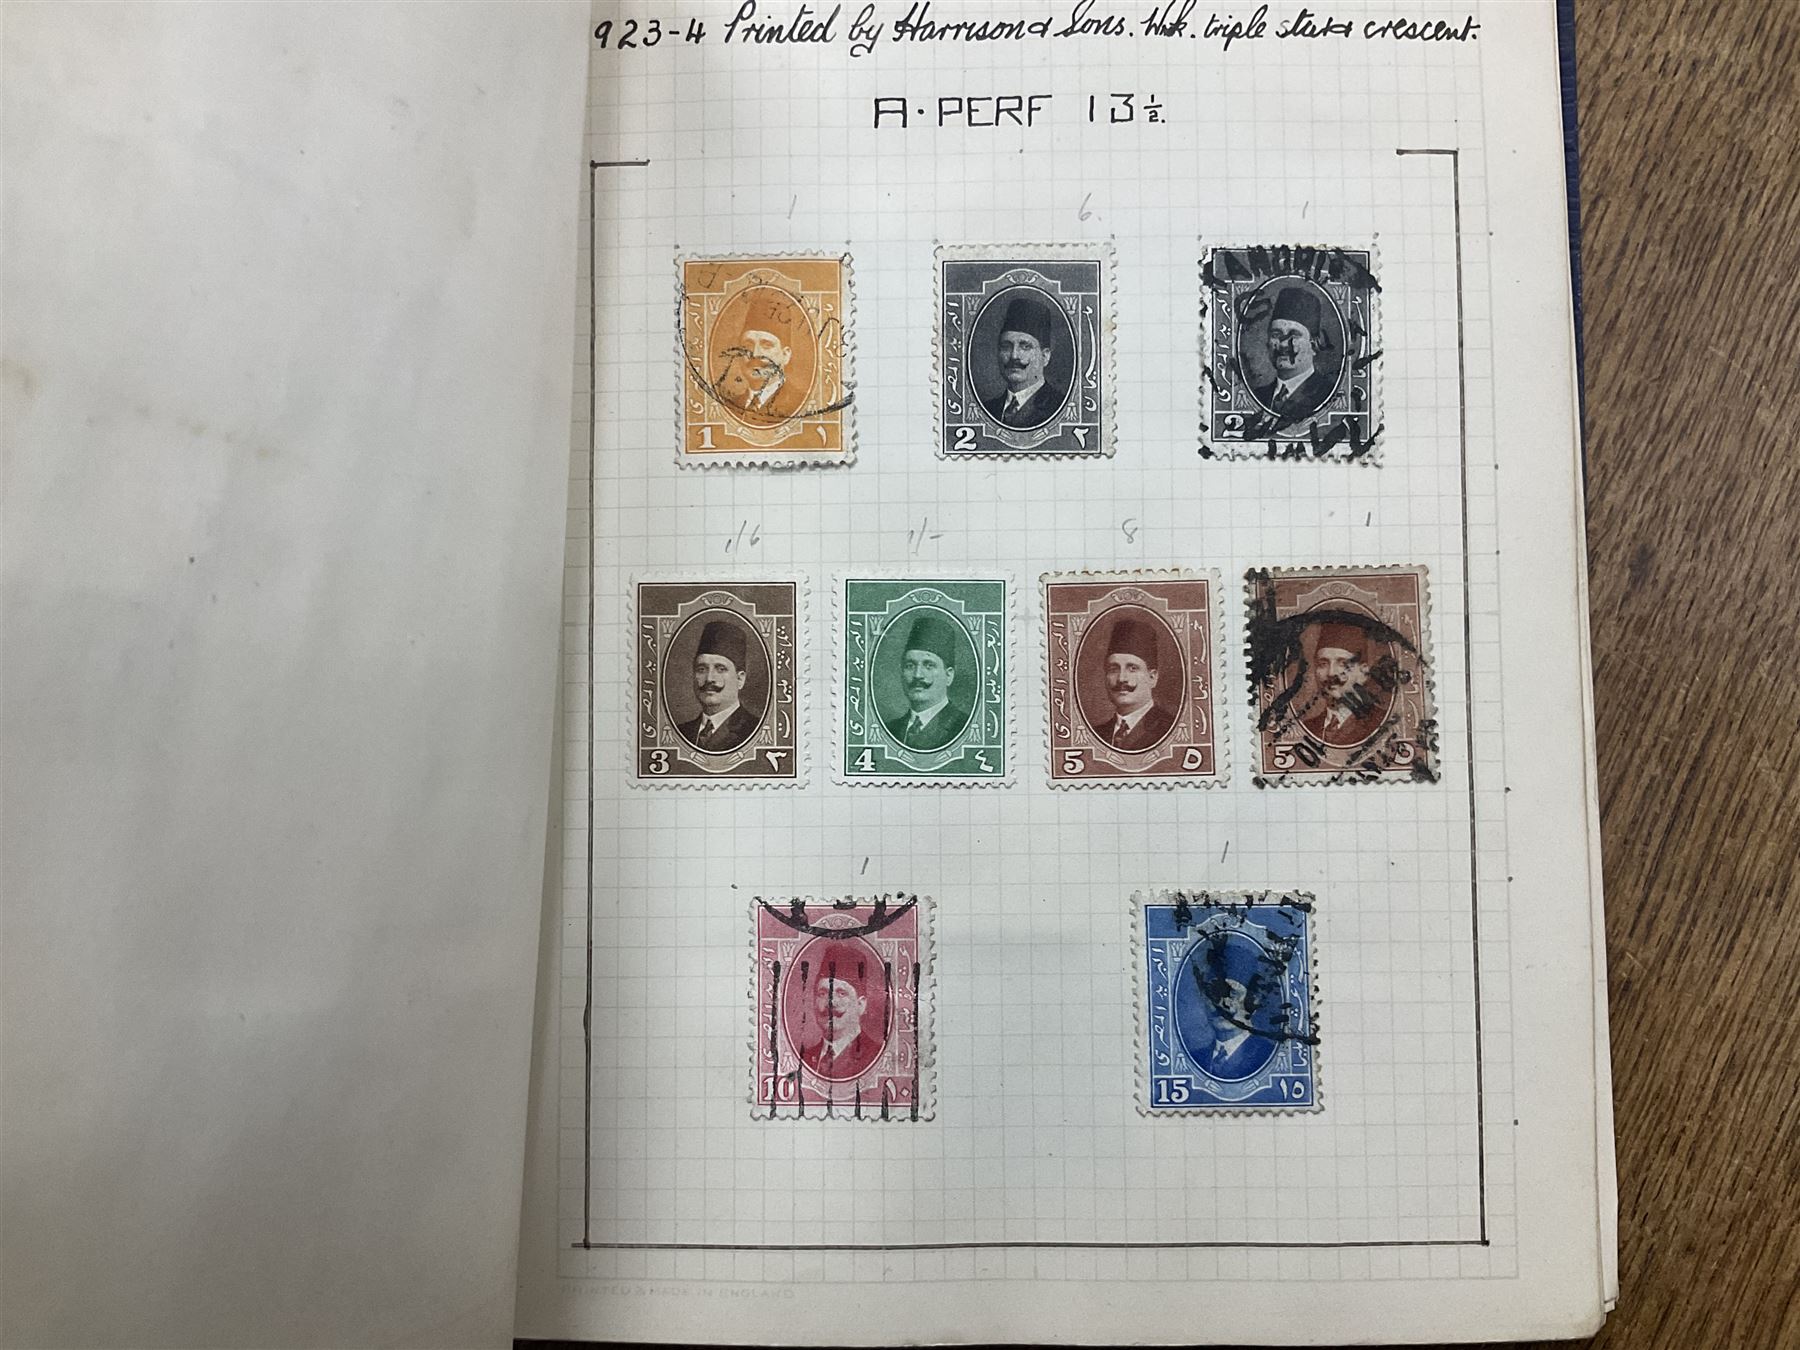 Egypt 1866 and later stamps - Image 503 of 761